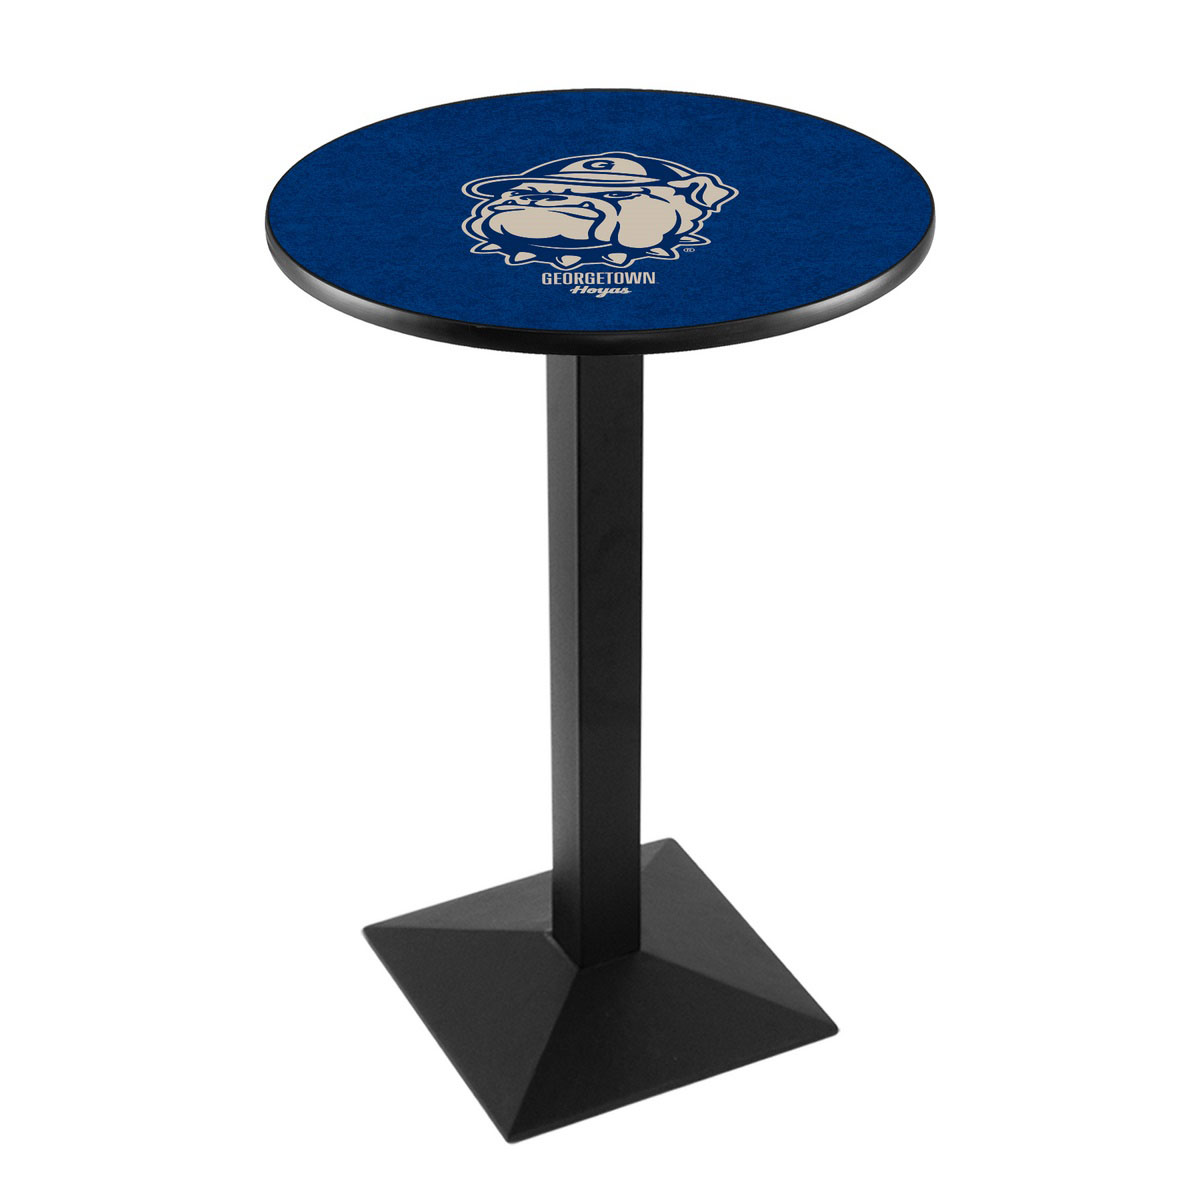 Georgetown University Logo Pub Bar Table With Square Stand